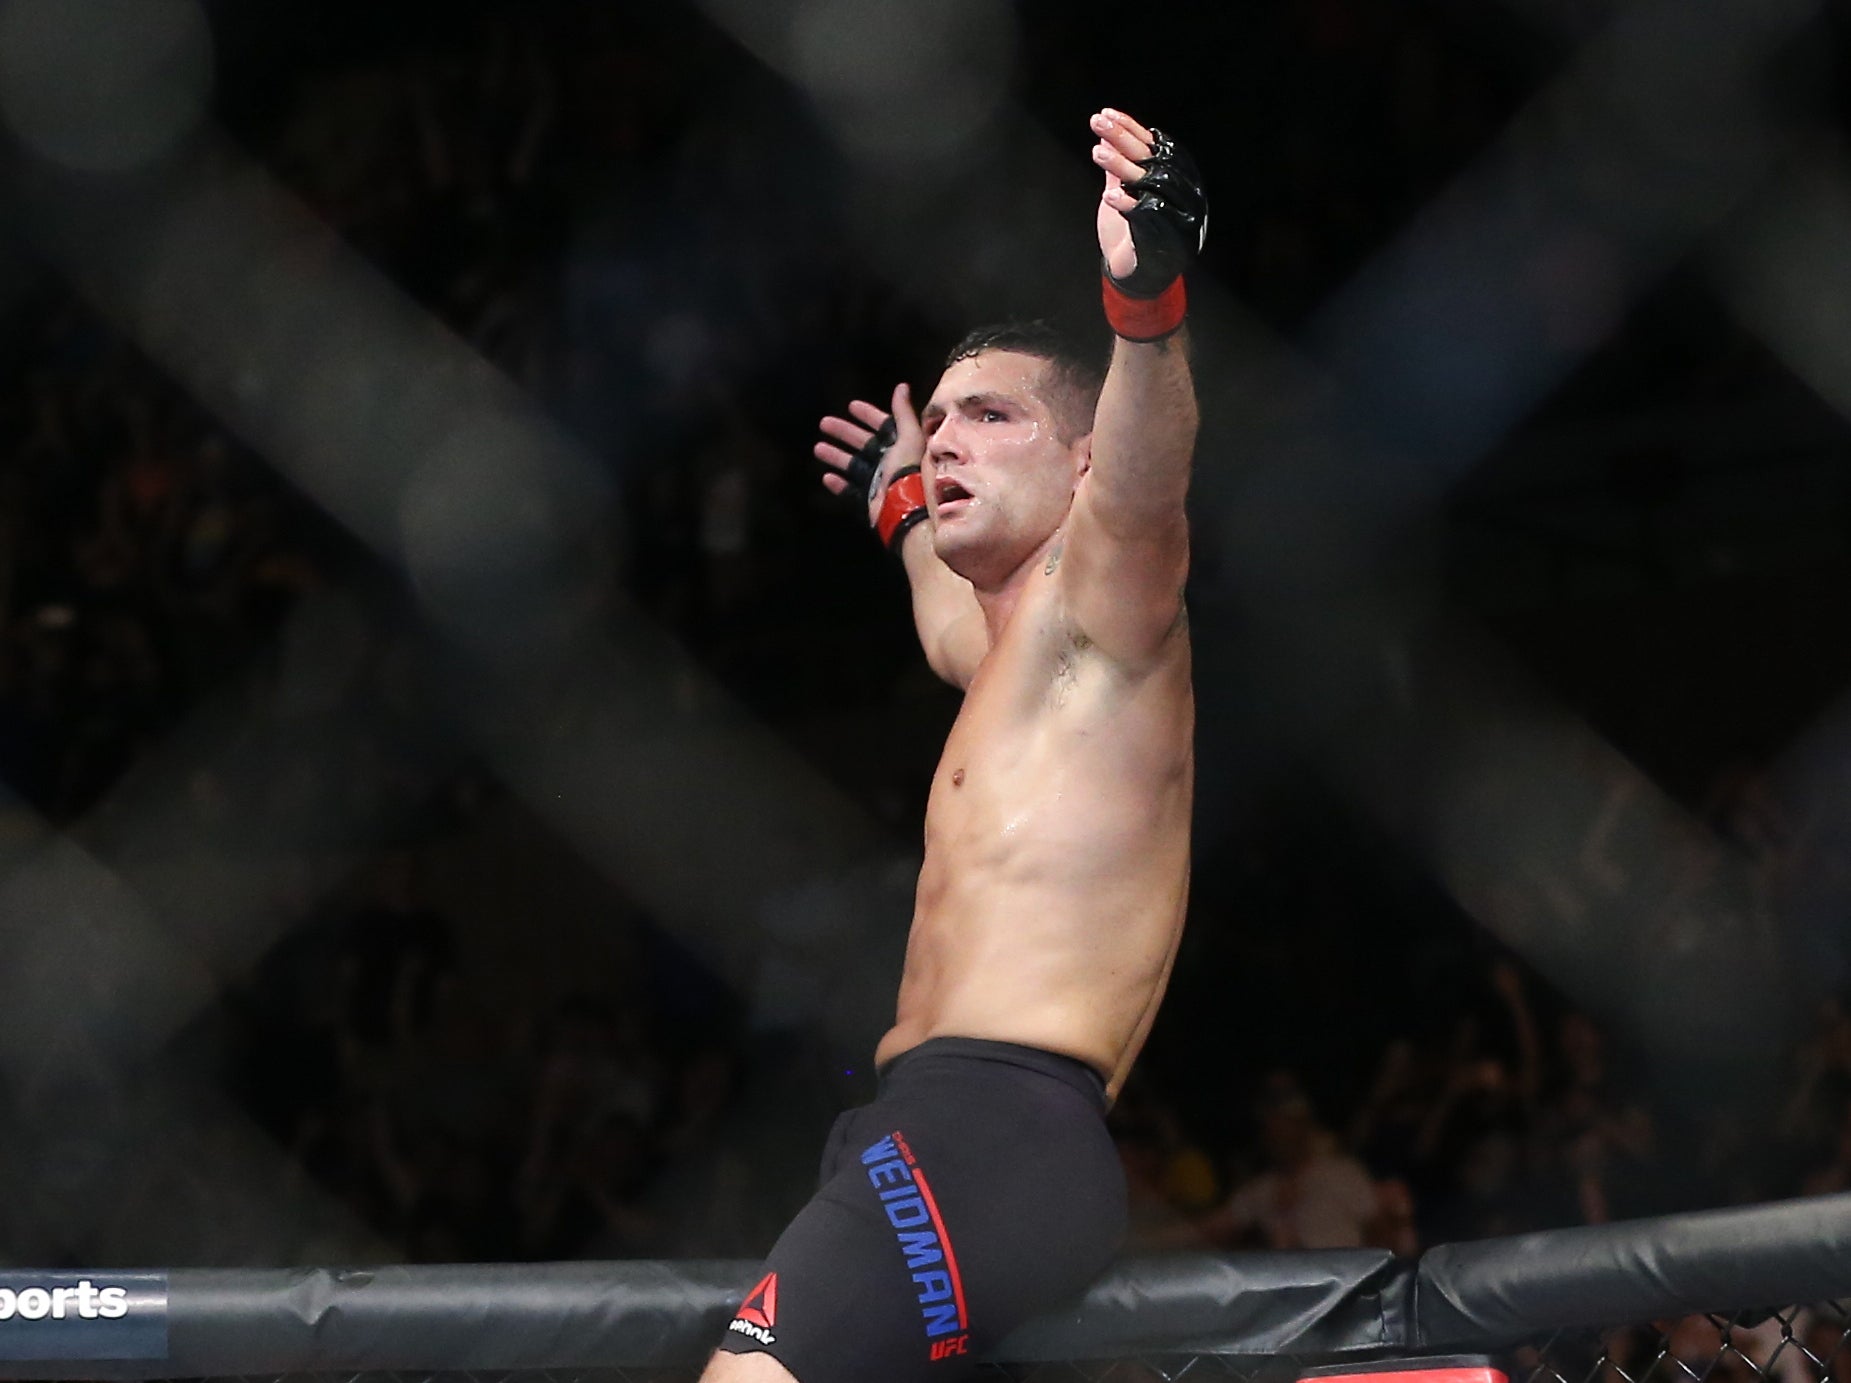 Weidman ended a run of three defeats in the Octagon